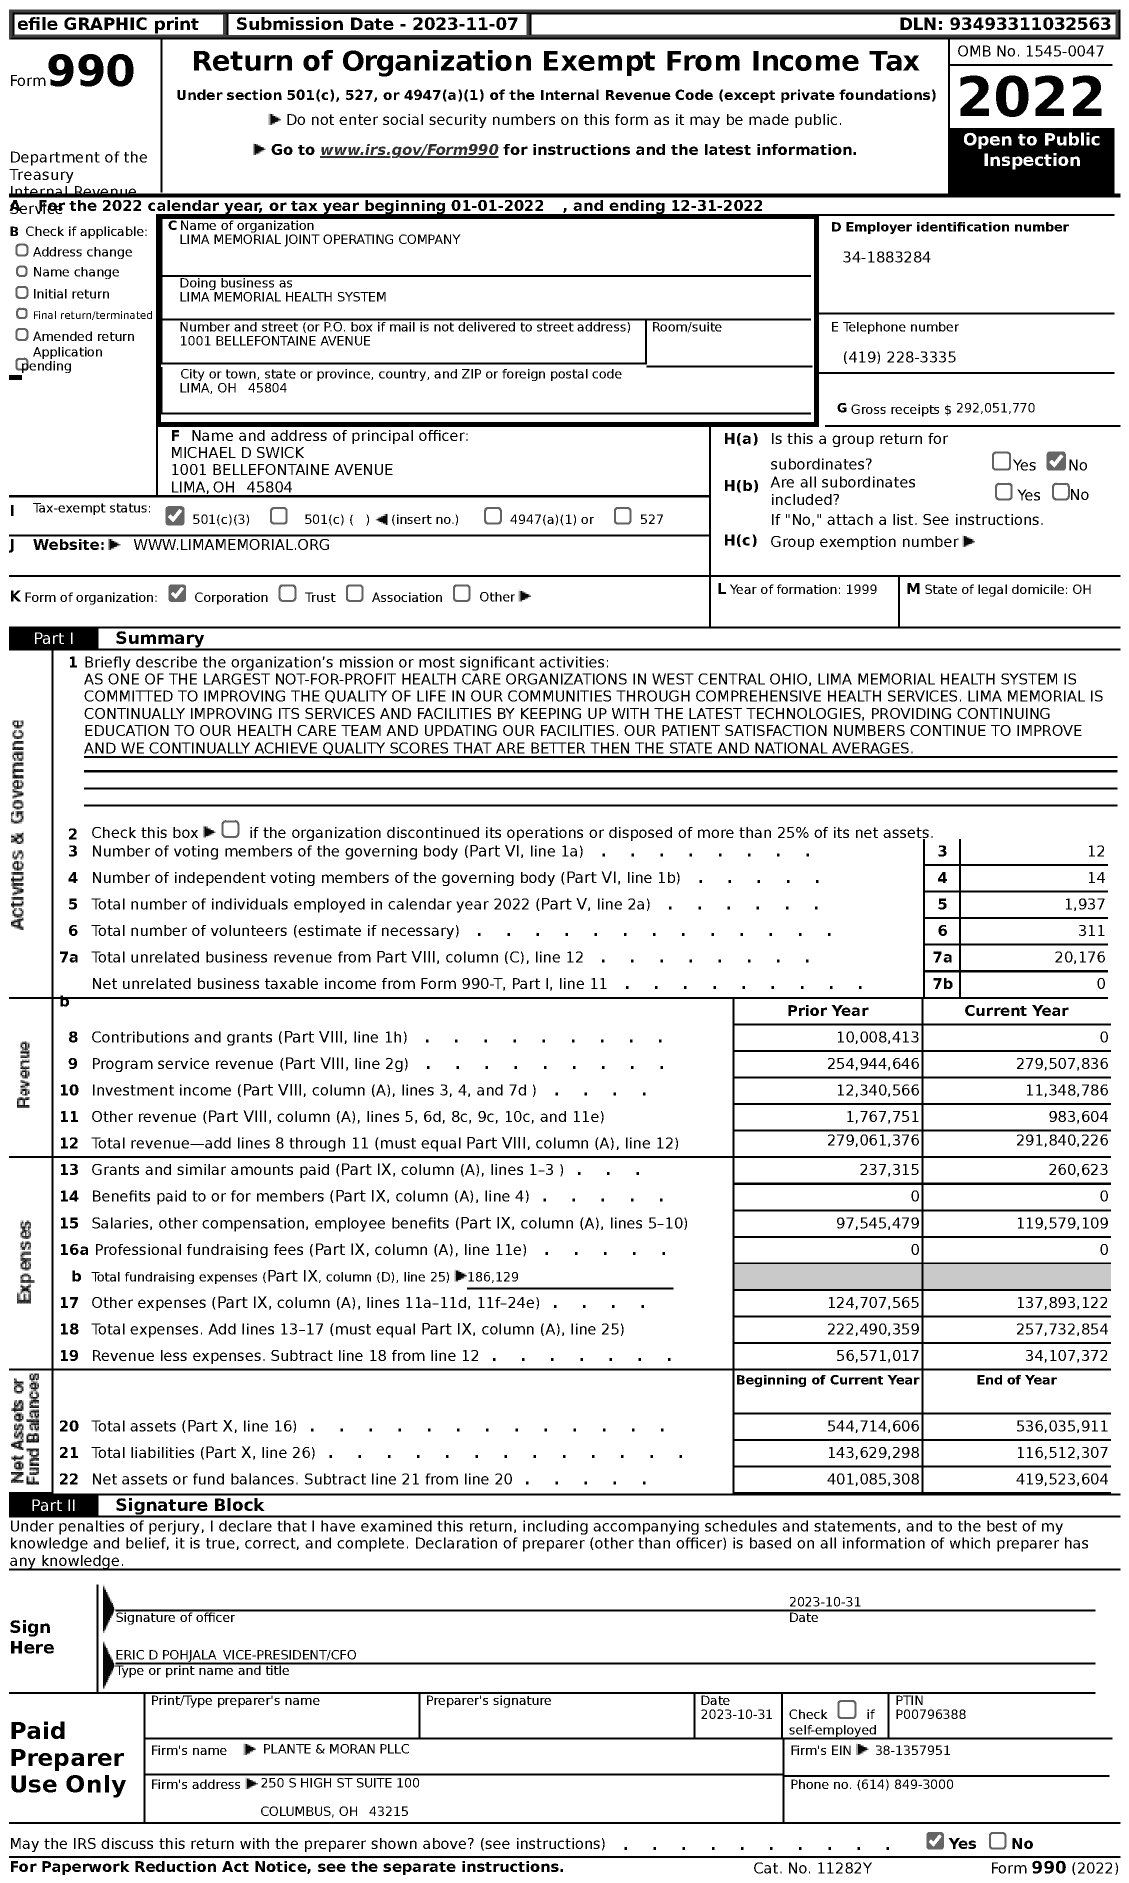 Image of first page of 2022 Form 990 for Lima Memorial Health System / Lima Memorial Joint Operating Company